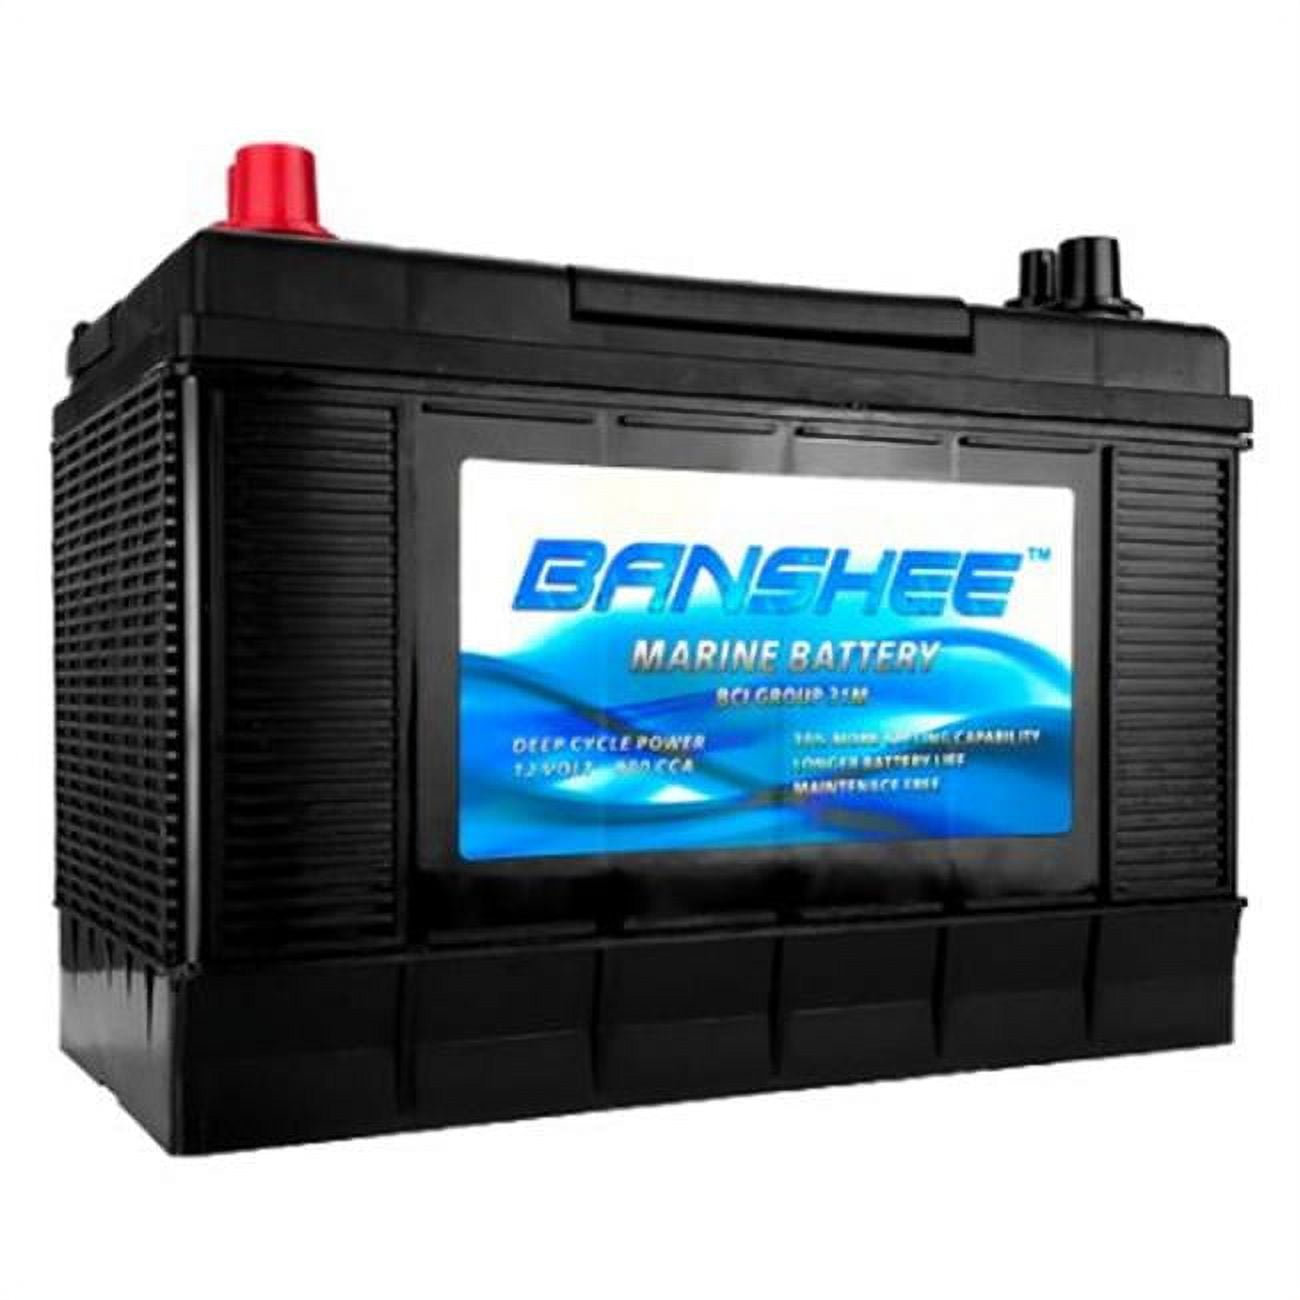 Picture of Banshee 31M-Banshee-3 31 Series Marine Battery Replaces Optima Blue Top D31M